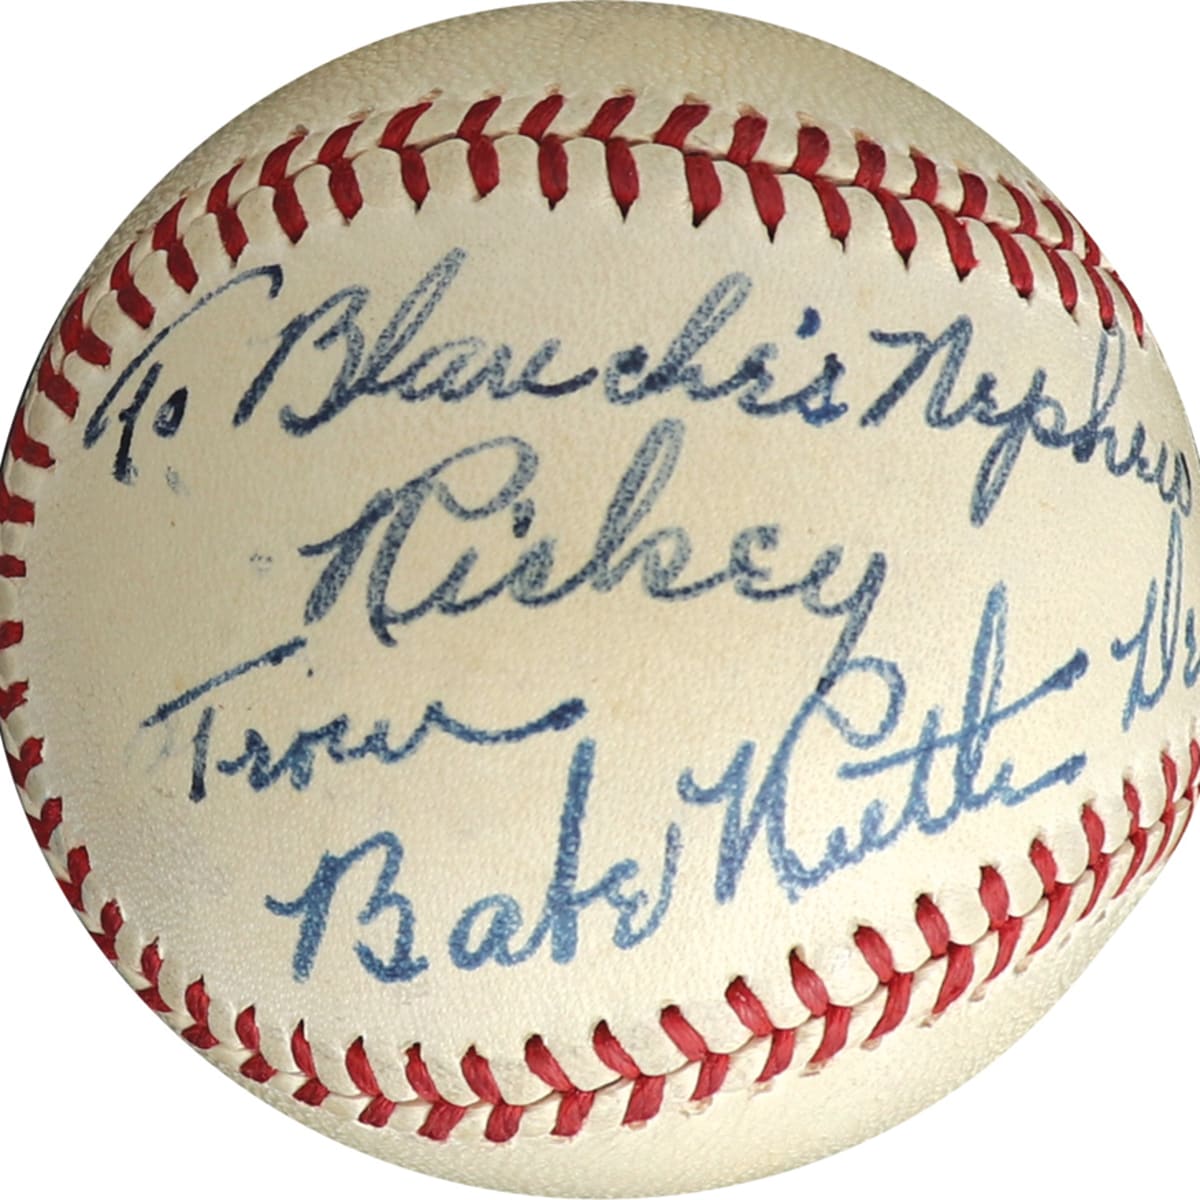 Babe Ruth Autographed Display Yankees Legend! Auction